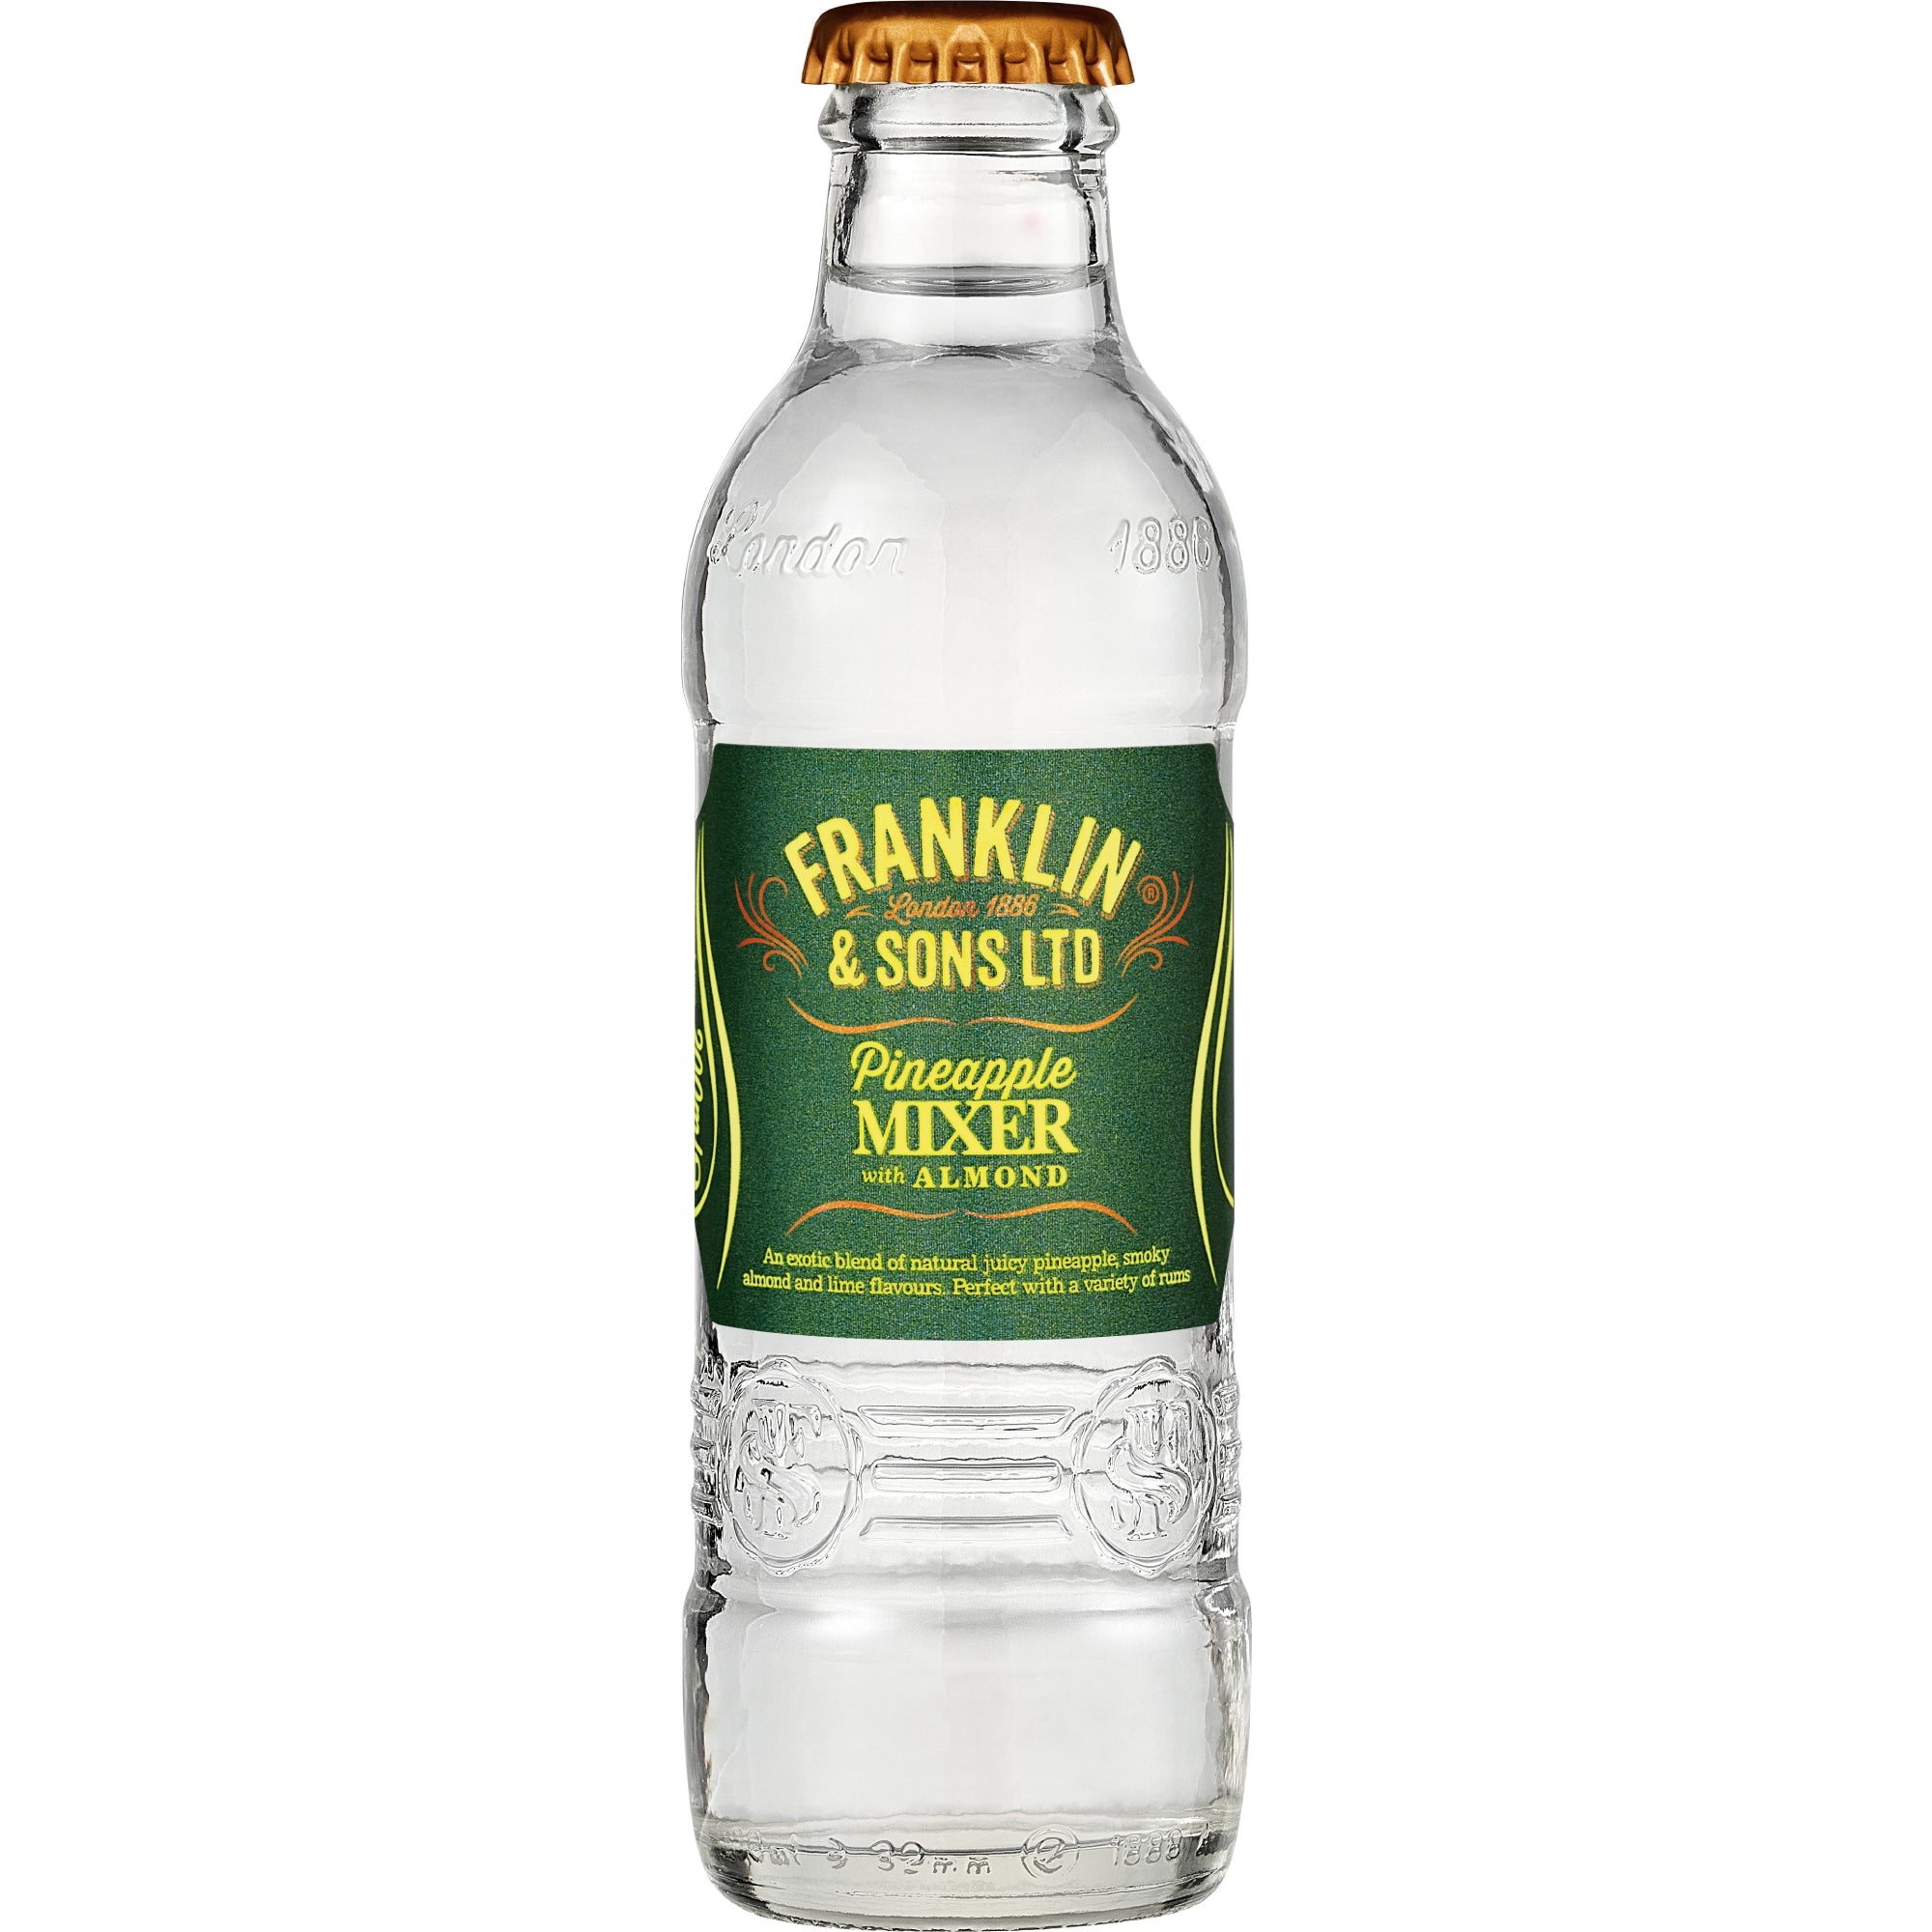 Franklin & Sons Tonic Water (Case of 24 x 200 mL) - Pineapple Mixer